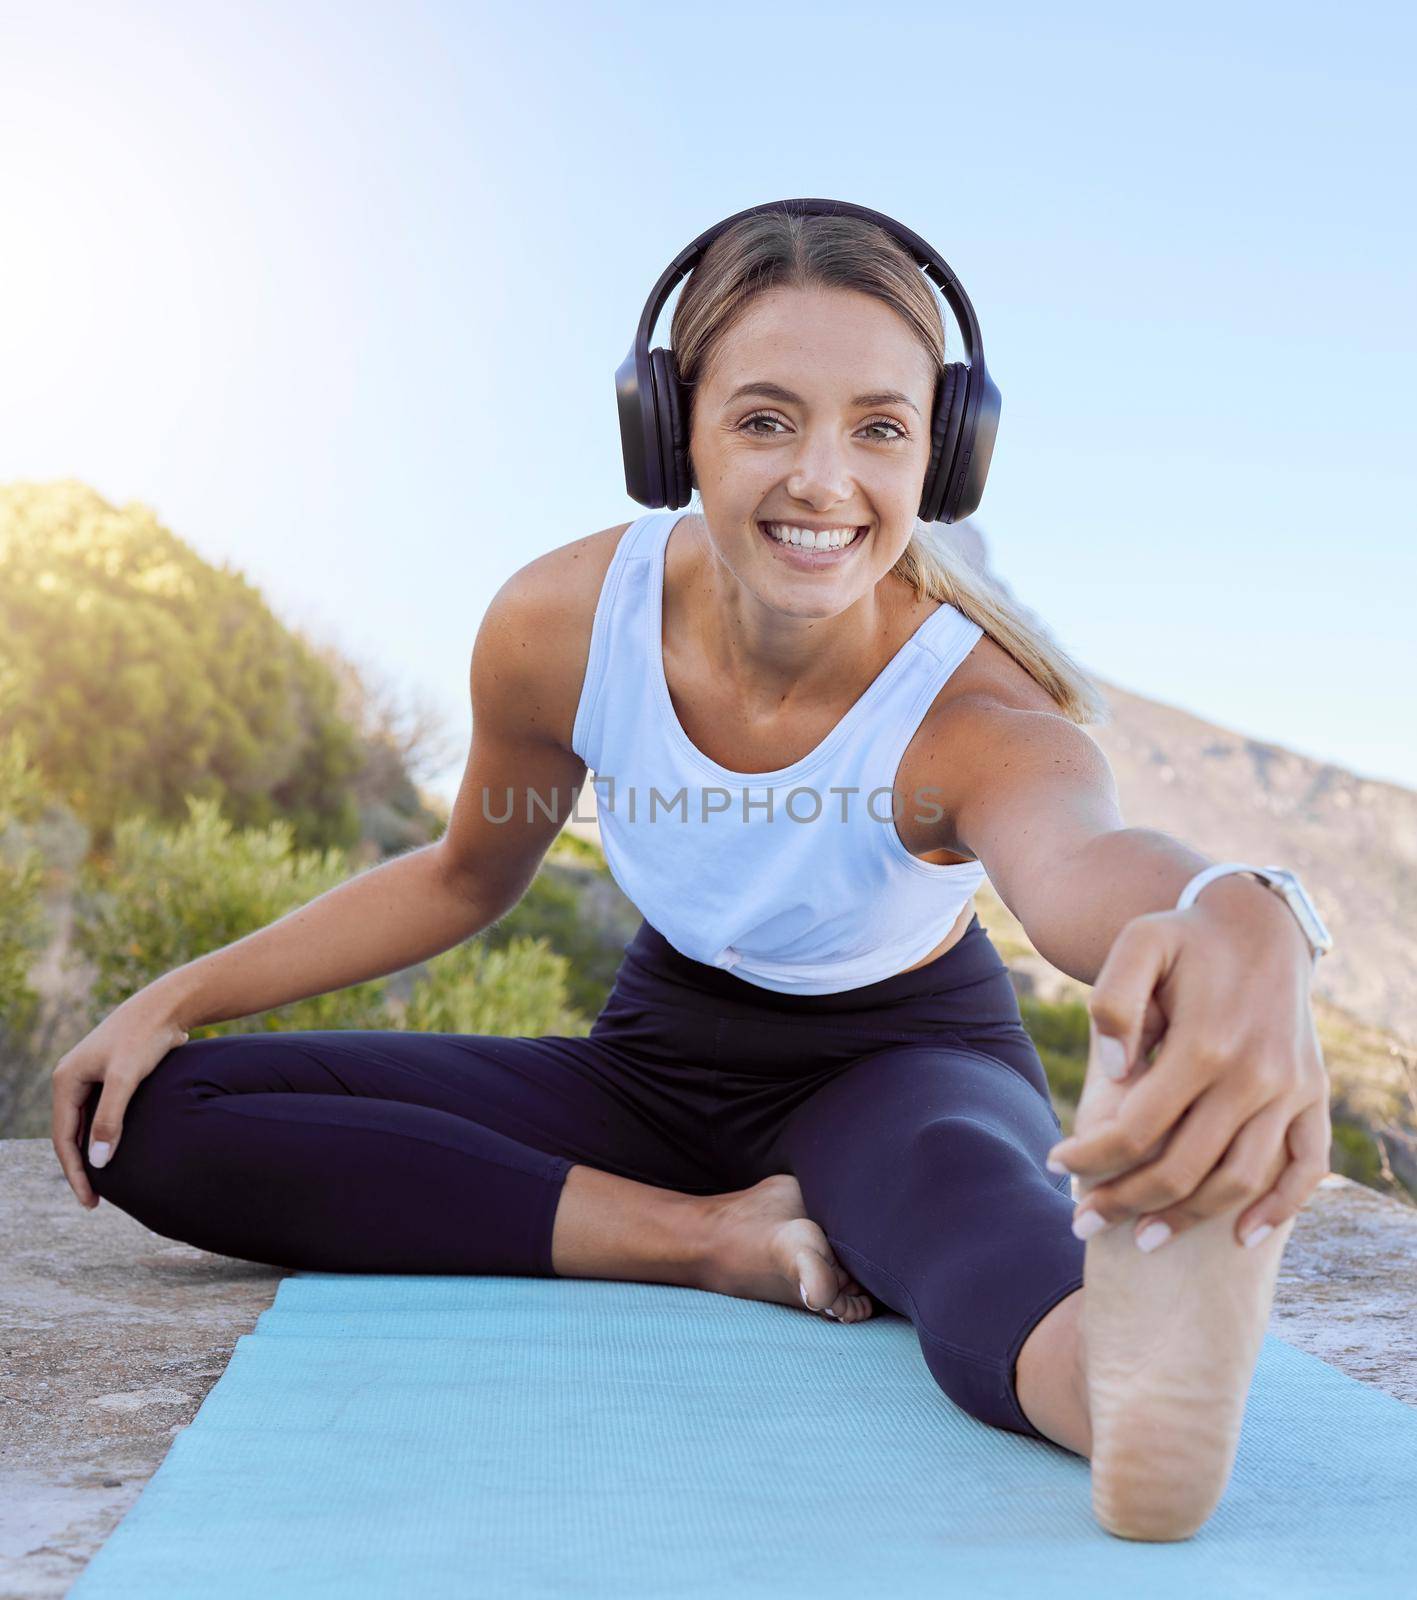 Workout yoga stretch, music streaming headphones and woman outdoor on a mat. Portrait of a happy smile from female wellness, exercise and healthy stretching before training in nature on a mountain.